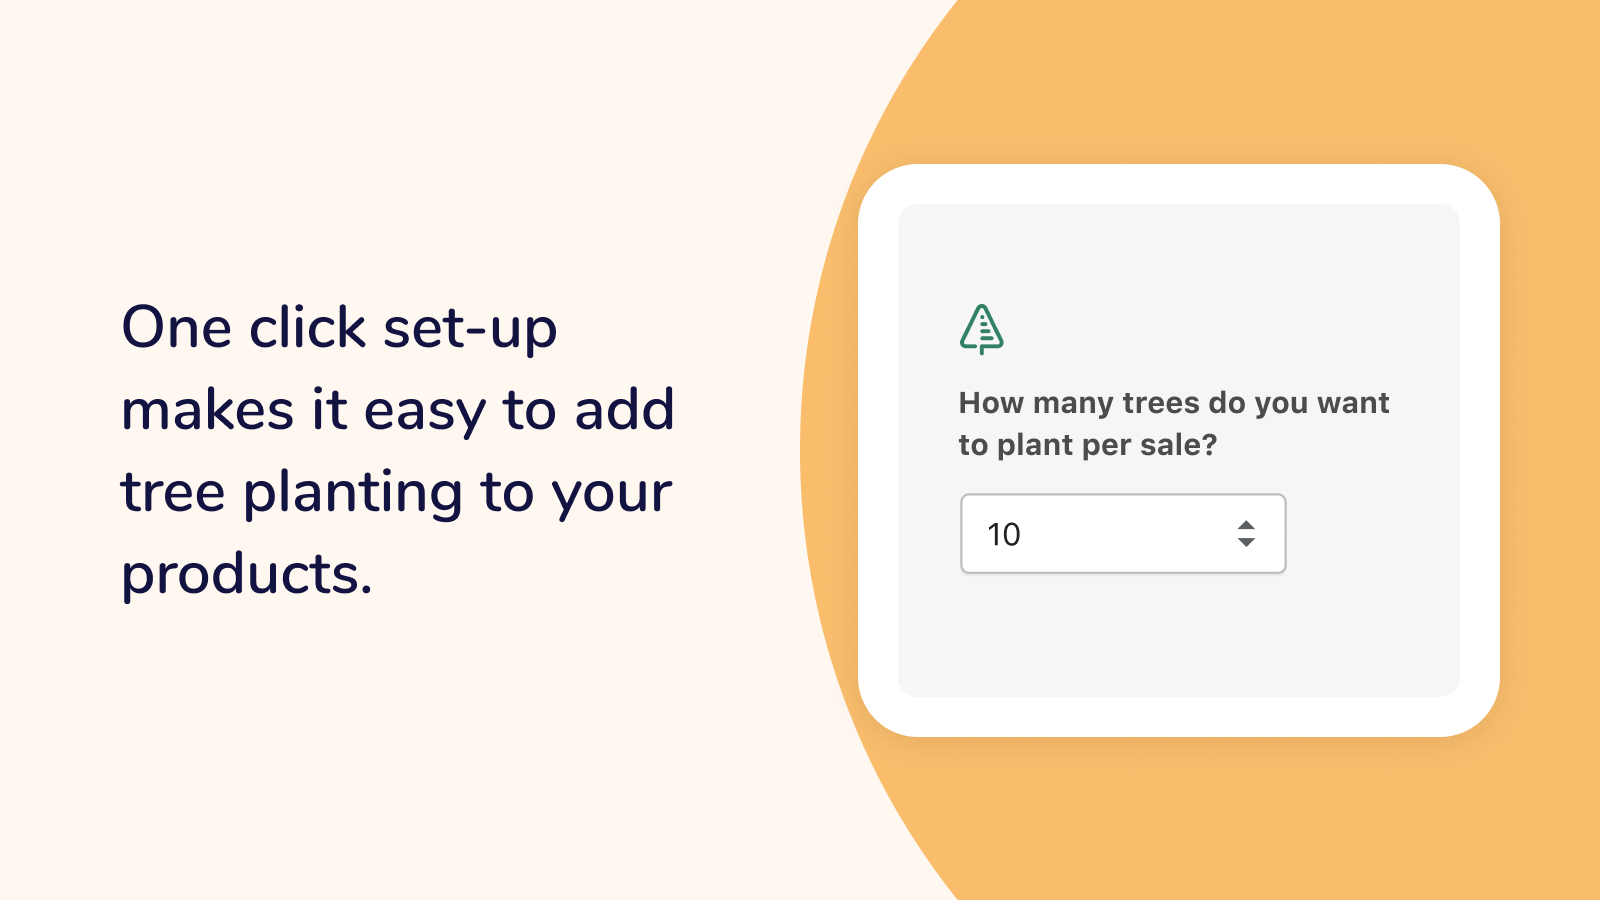 One click set up makes it easy to set up tree planting